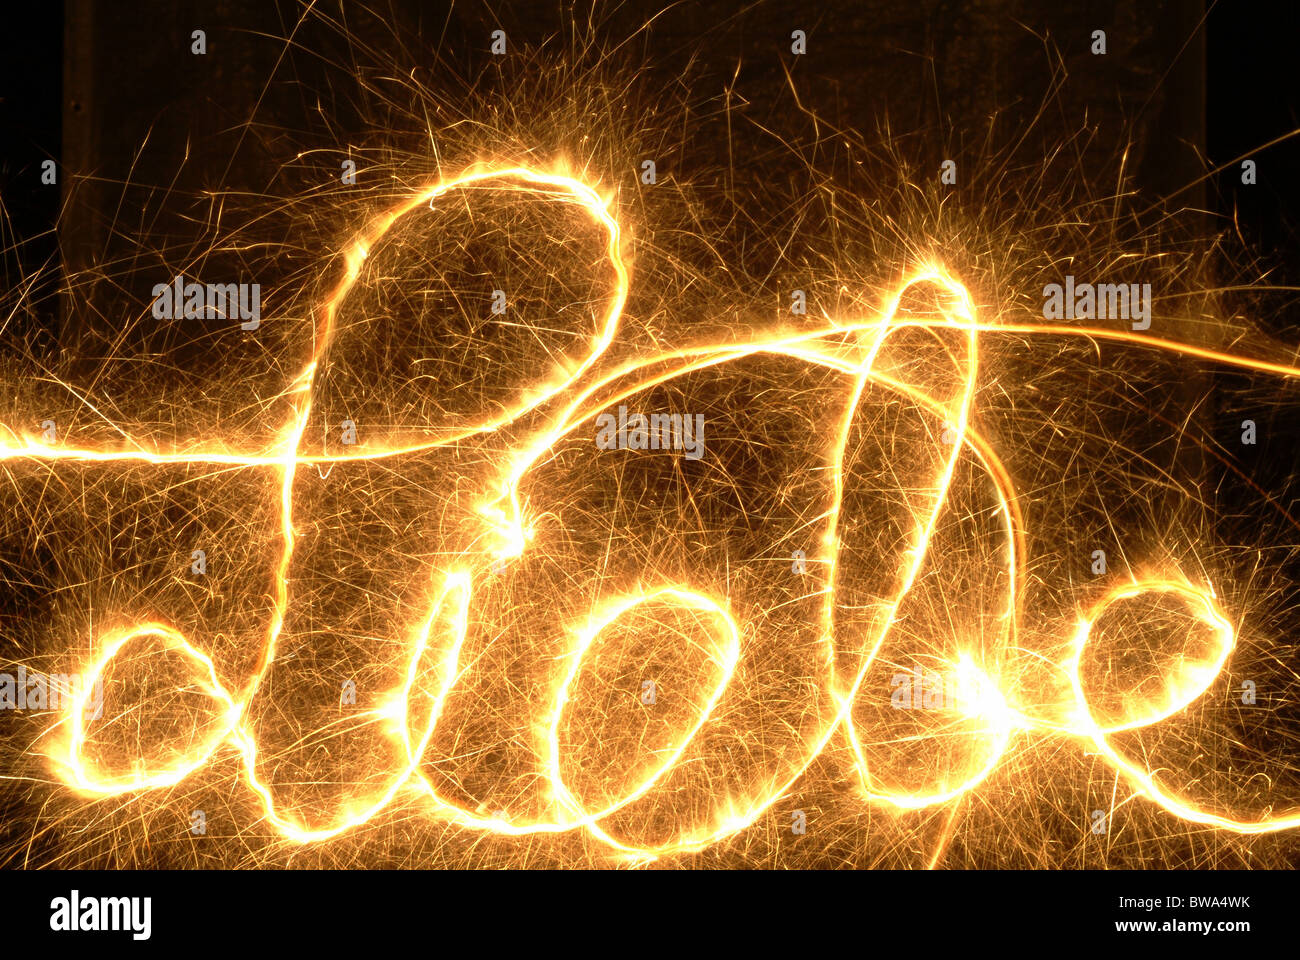 The word Liebe made of sparklers Stock Photo